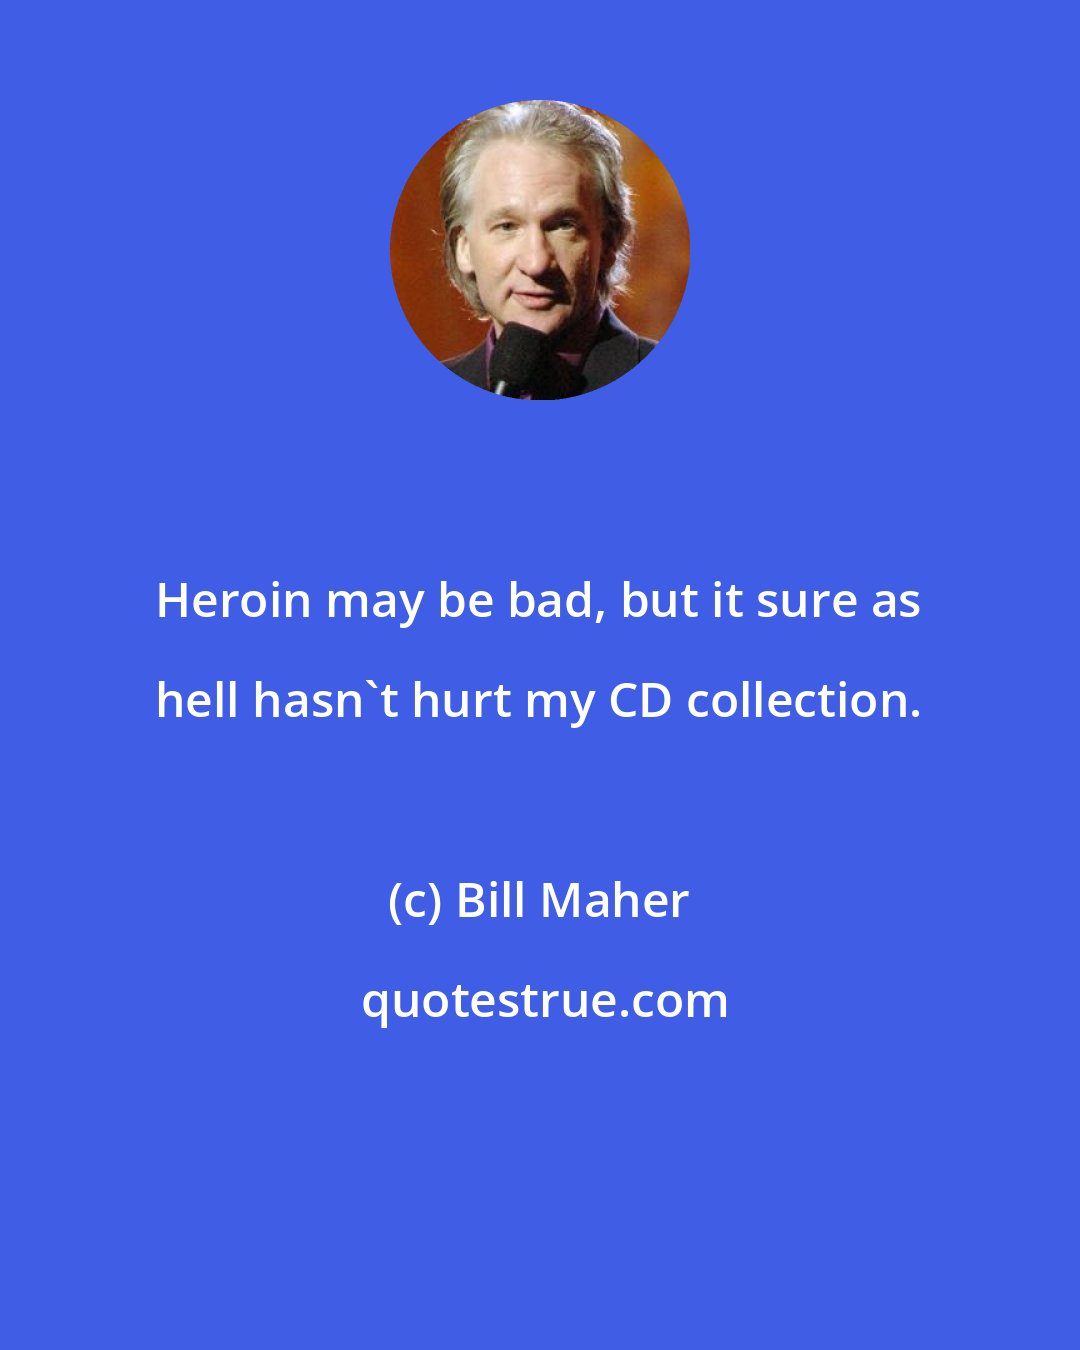 Bill Maher: Heroin may be bad, but it sure as hell hasn't hurt my CD collection.